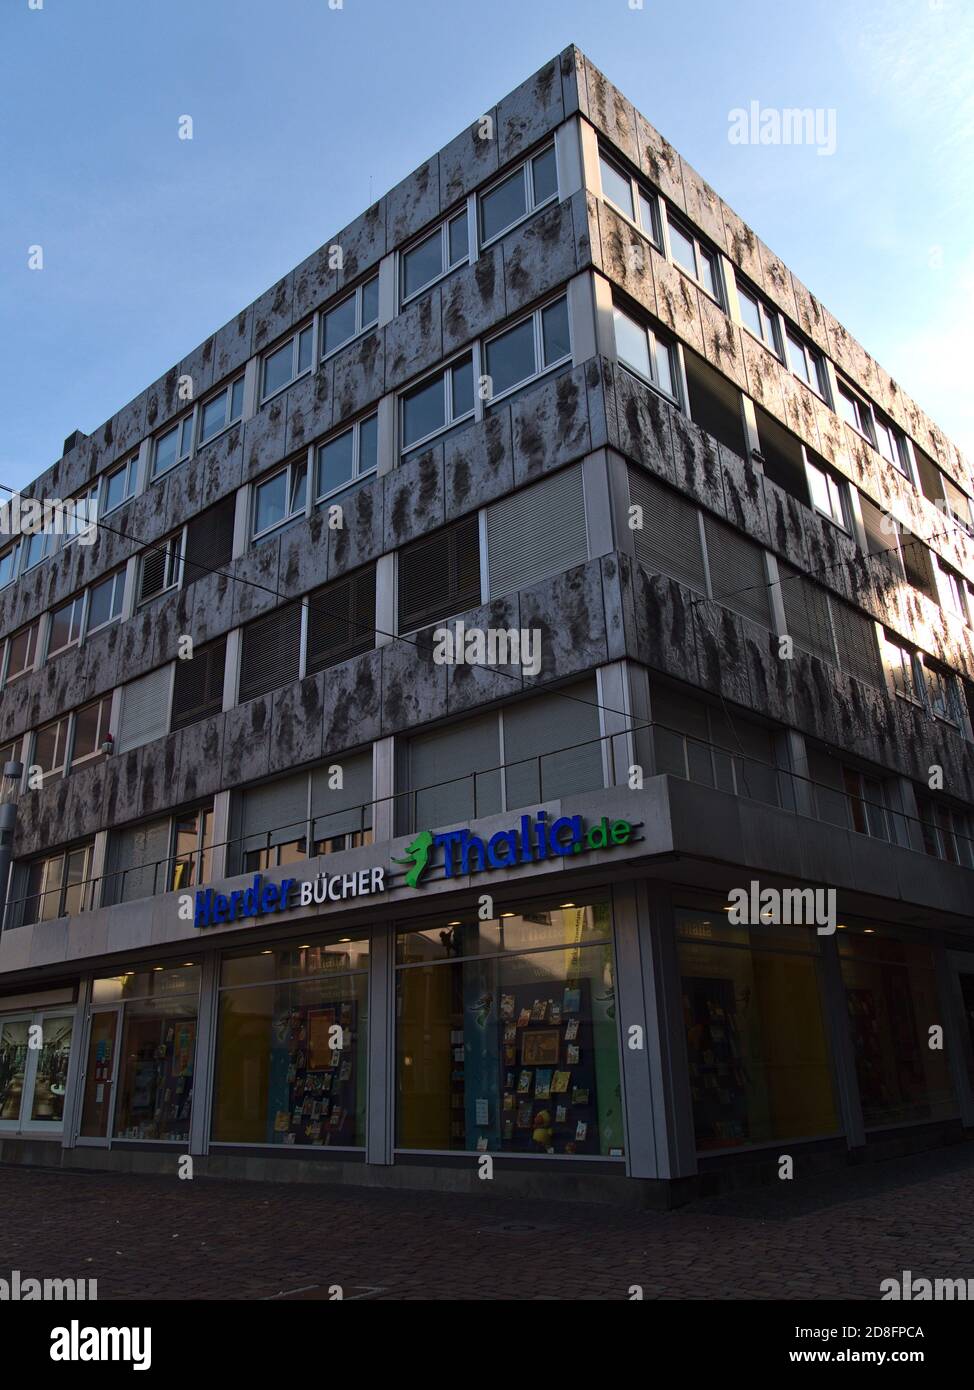 Freiburg, Baden-Wuerttemberg, Germany - 10/25/2020: Front view of Herder Bücher, part of German book shop chain Thalia (more than 200 book shops). Stock Photo